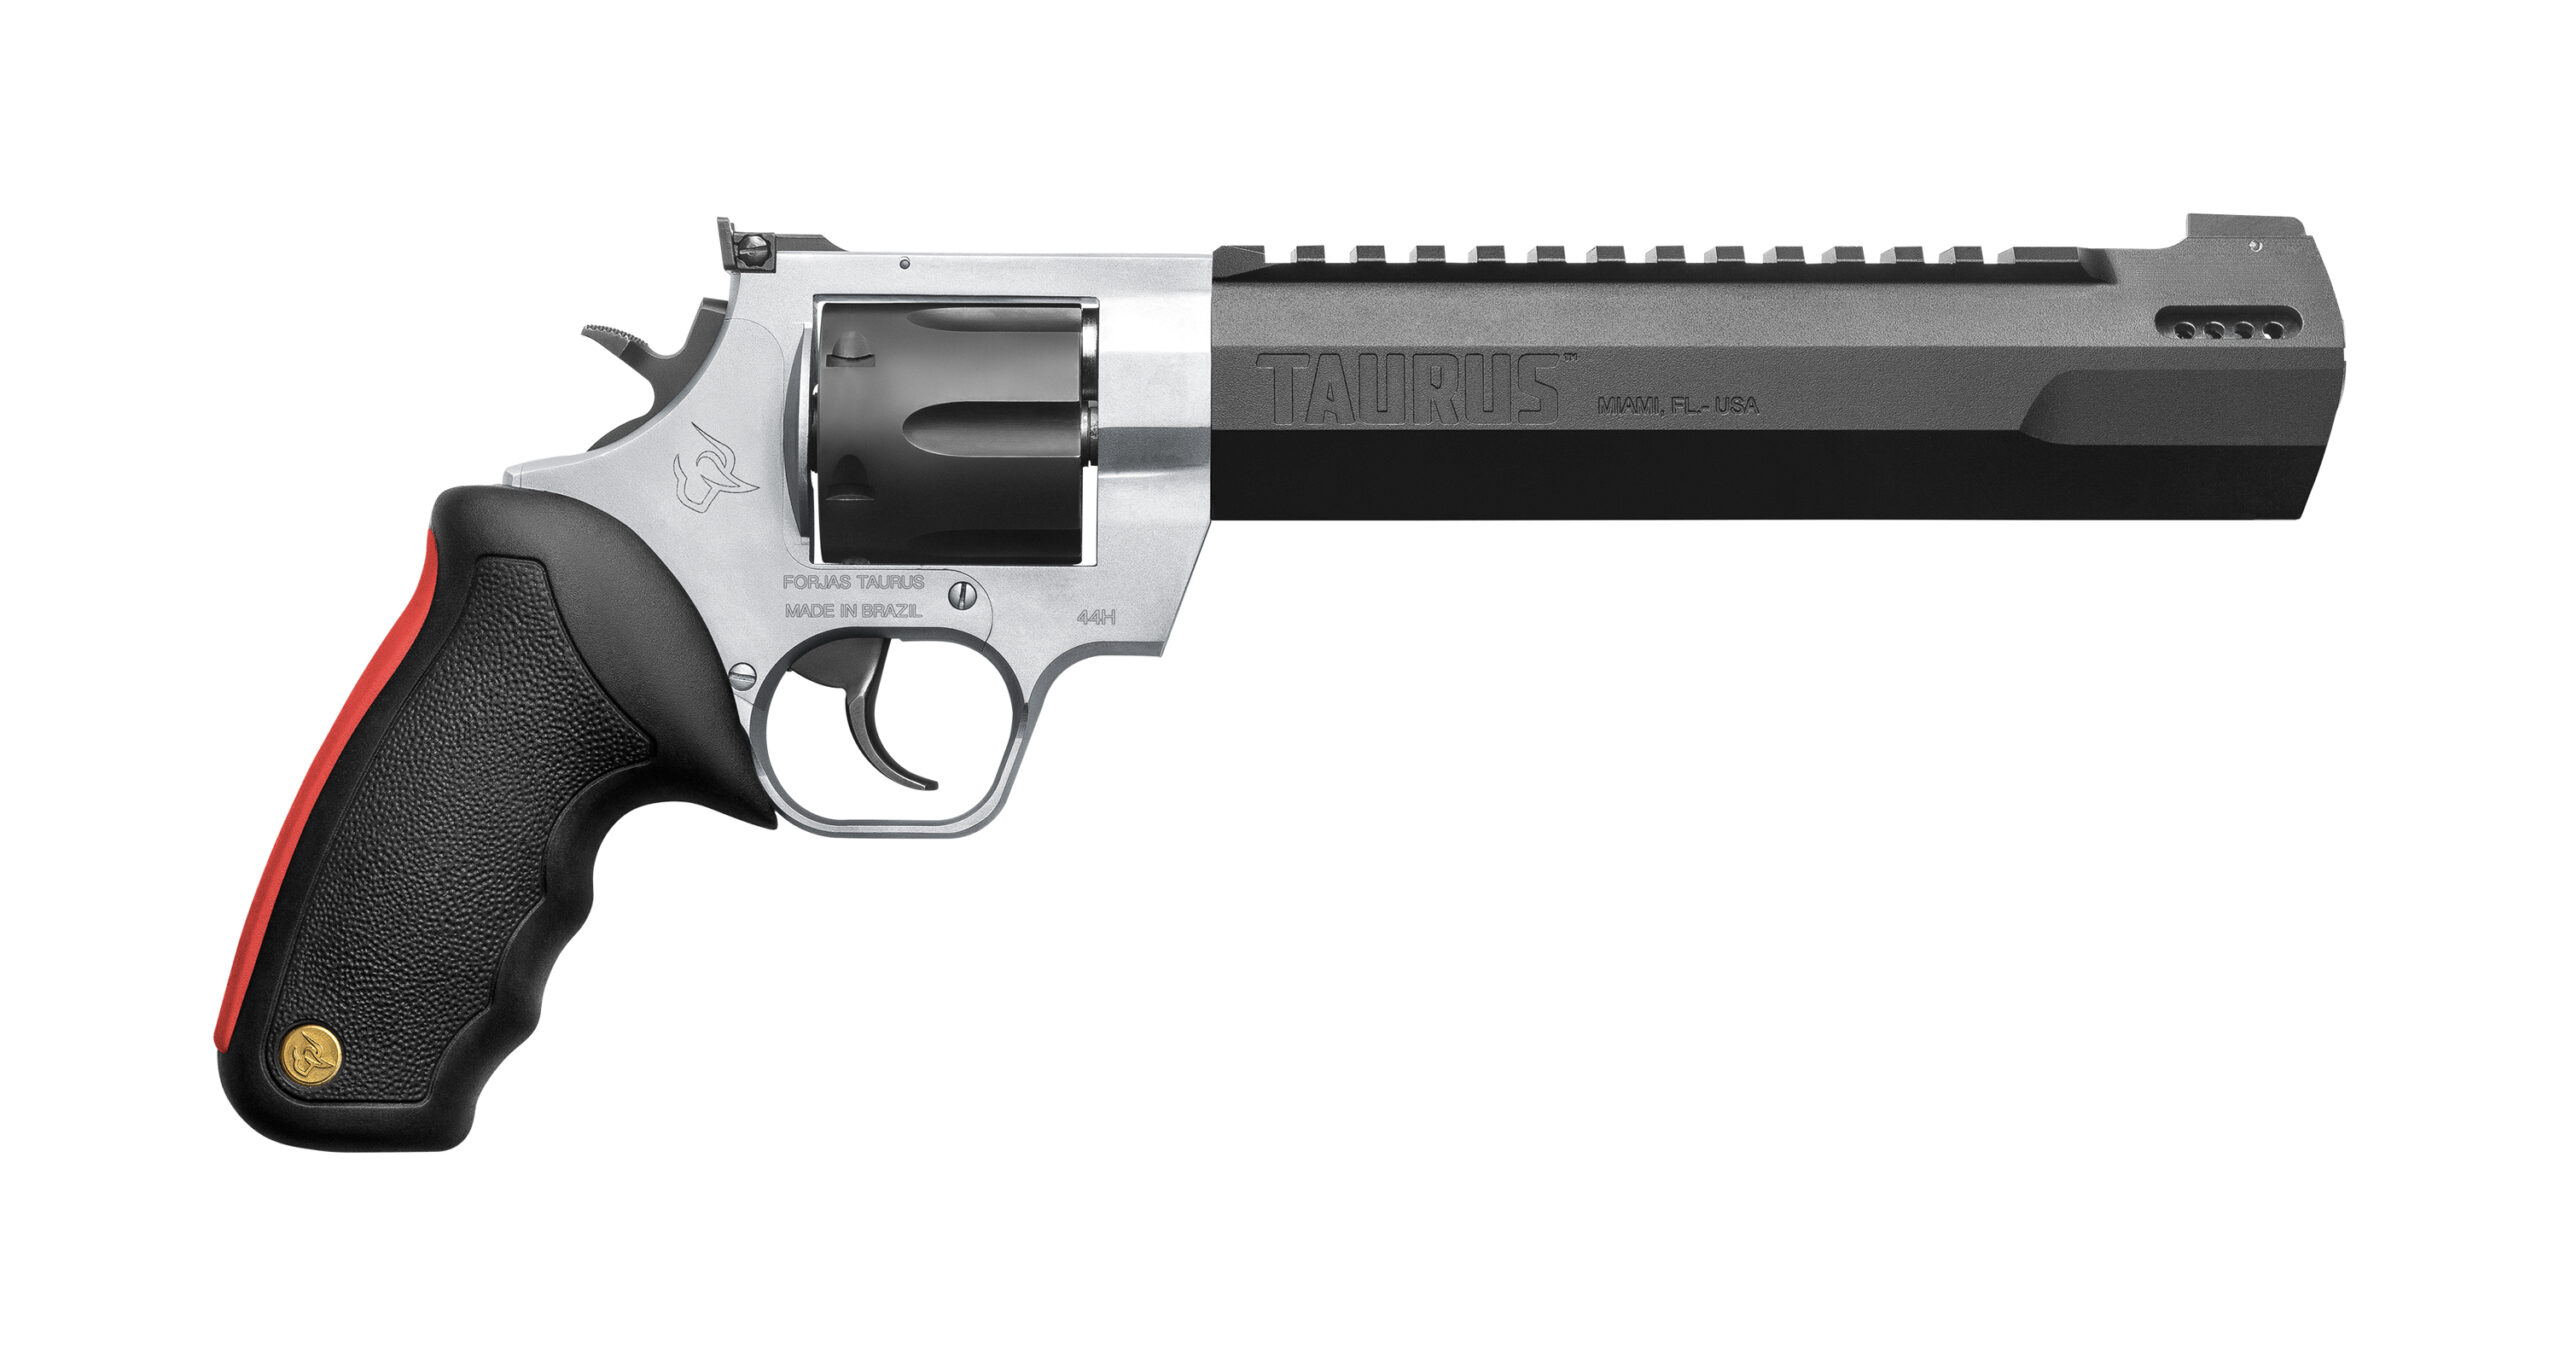 The Ranging Hunter is available in .357 Magnum